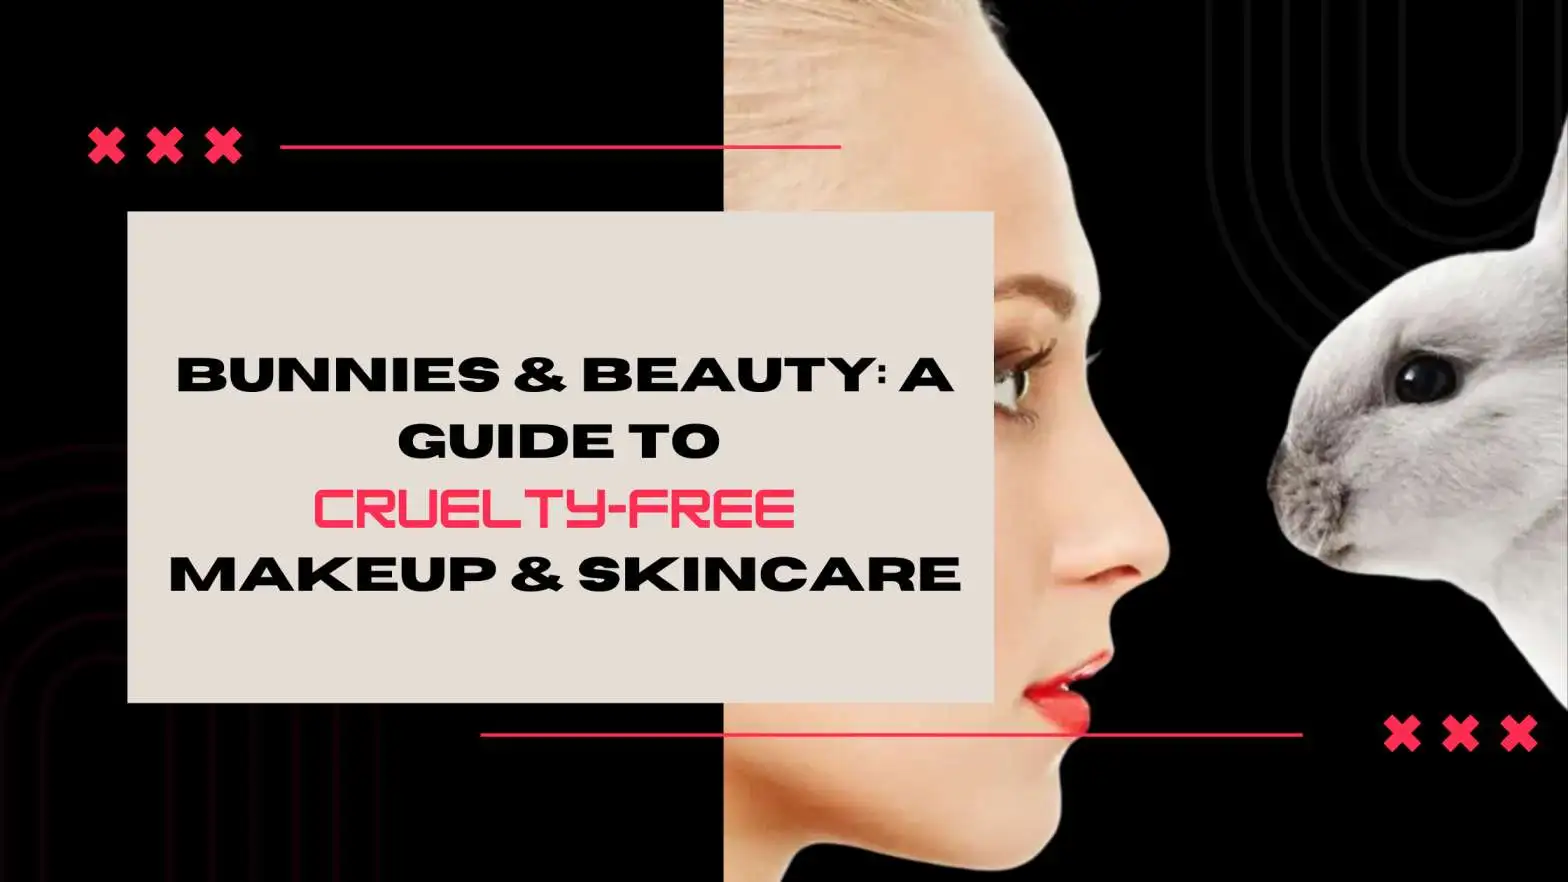 Bunnies & Beauty: A Guide to Cruelty-Free Makeup & Skincare